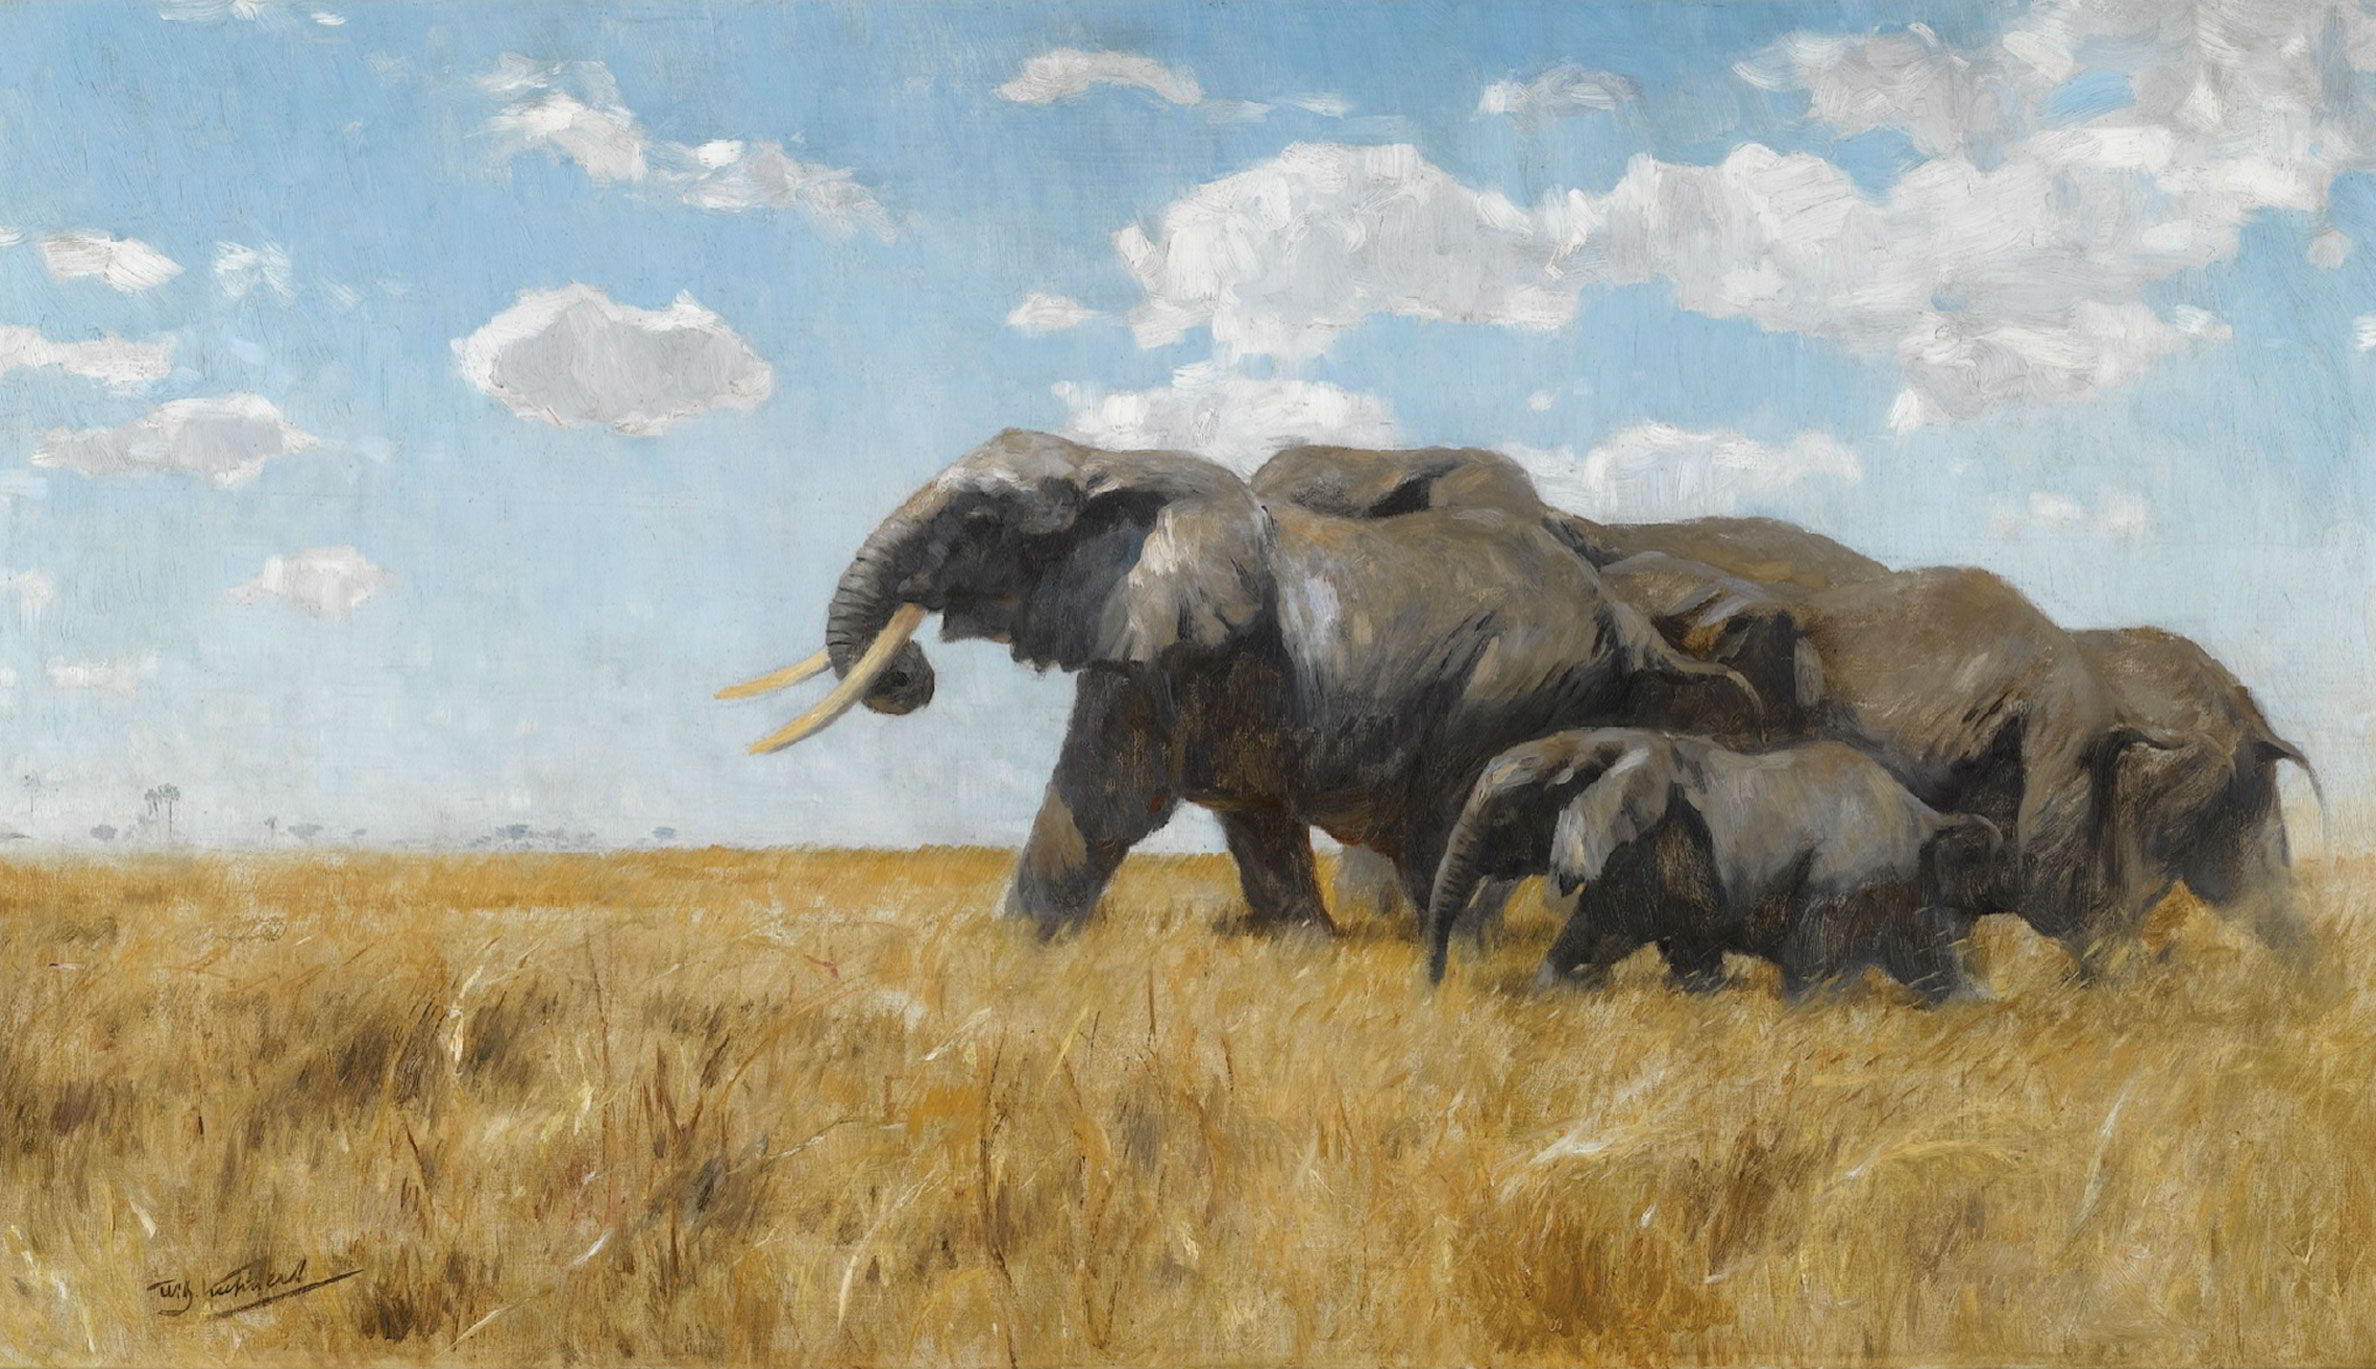 Elephants on the Move by Wilhelm Kuhnert